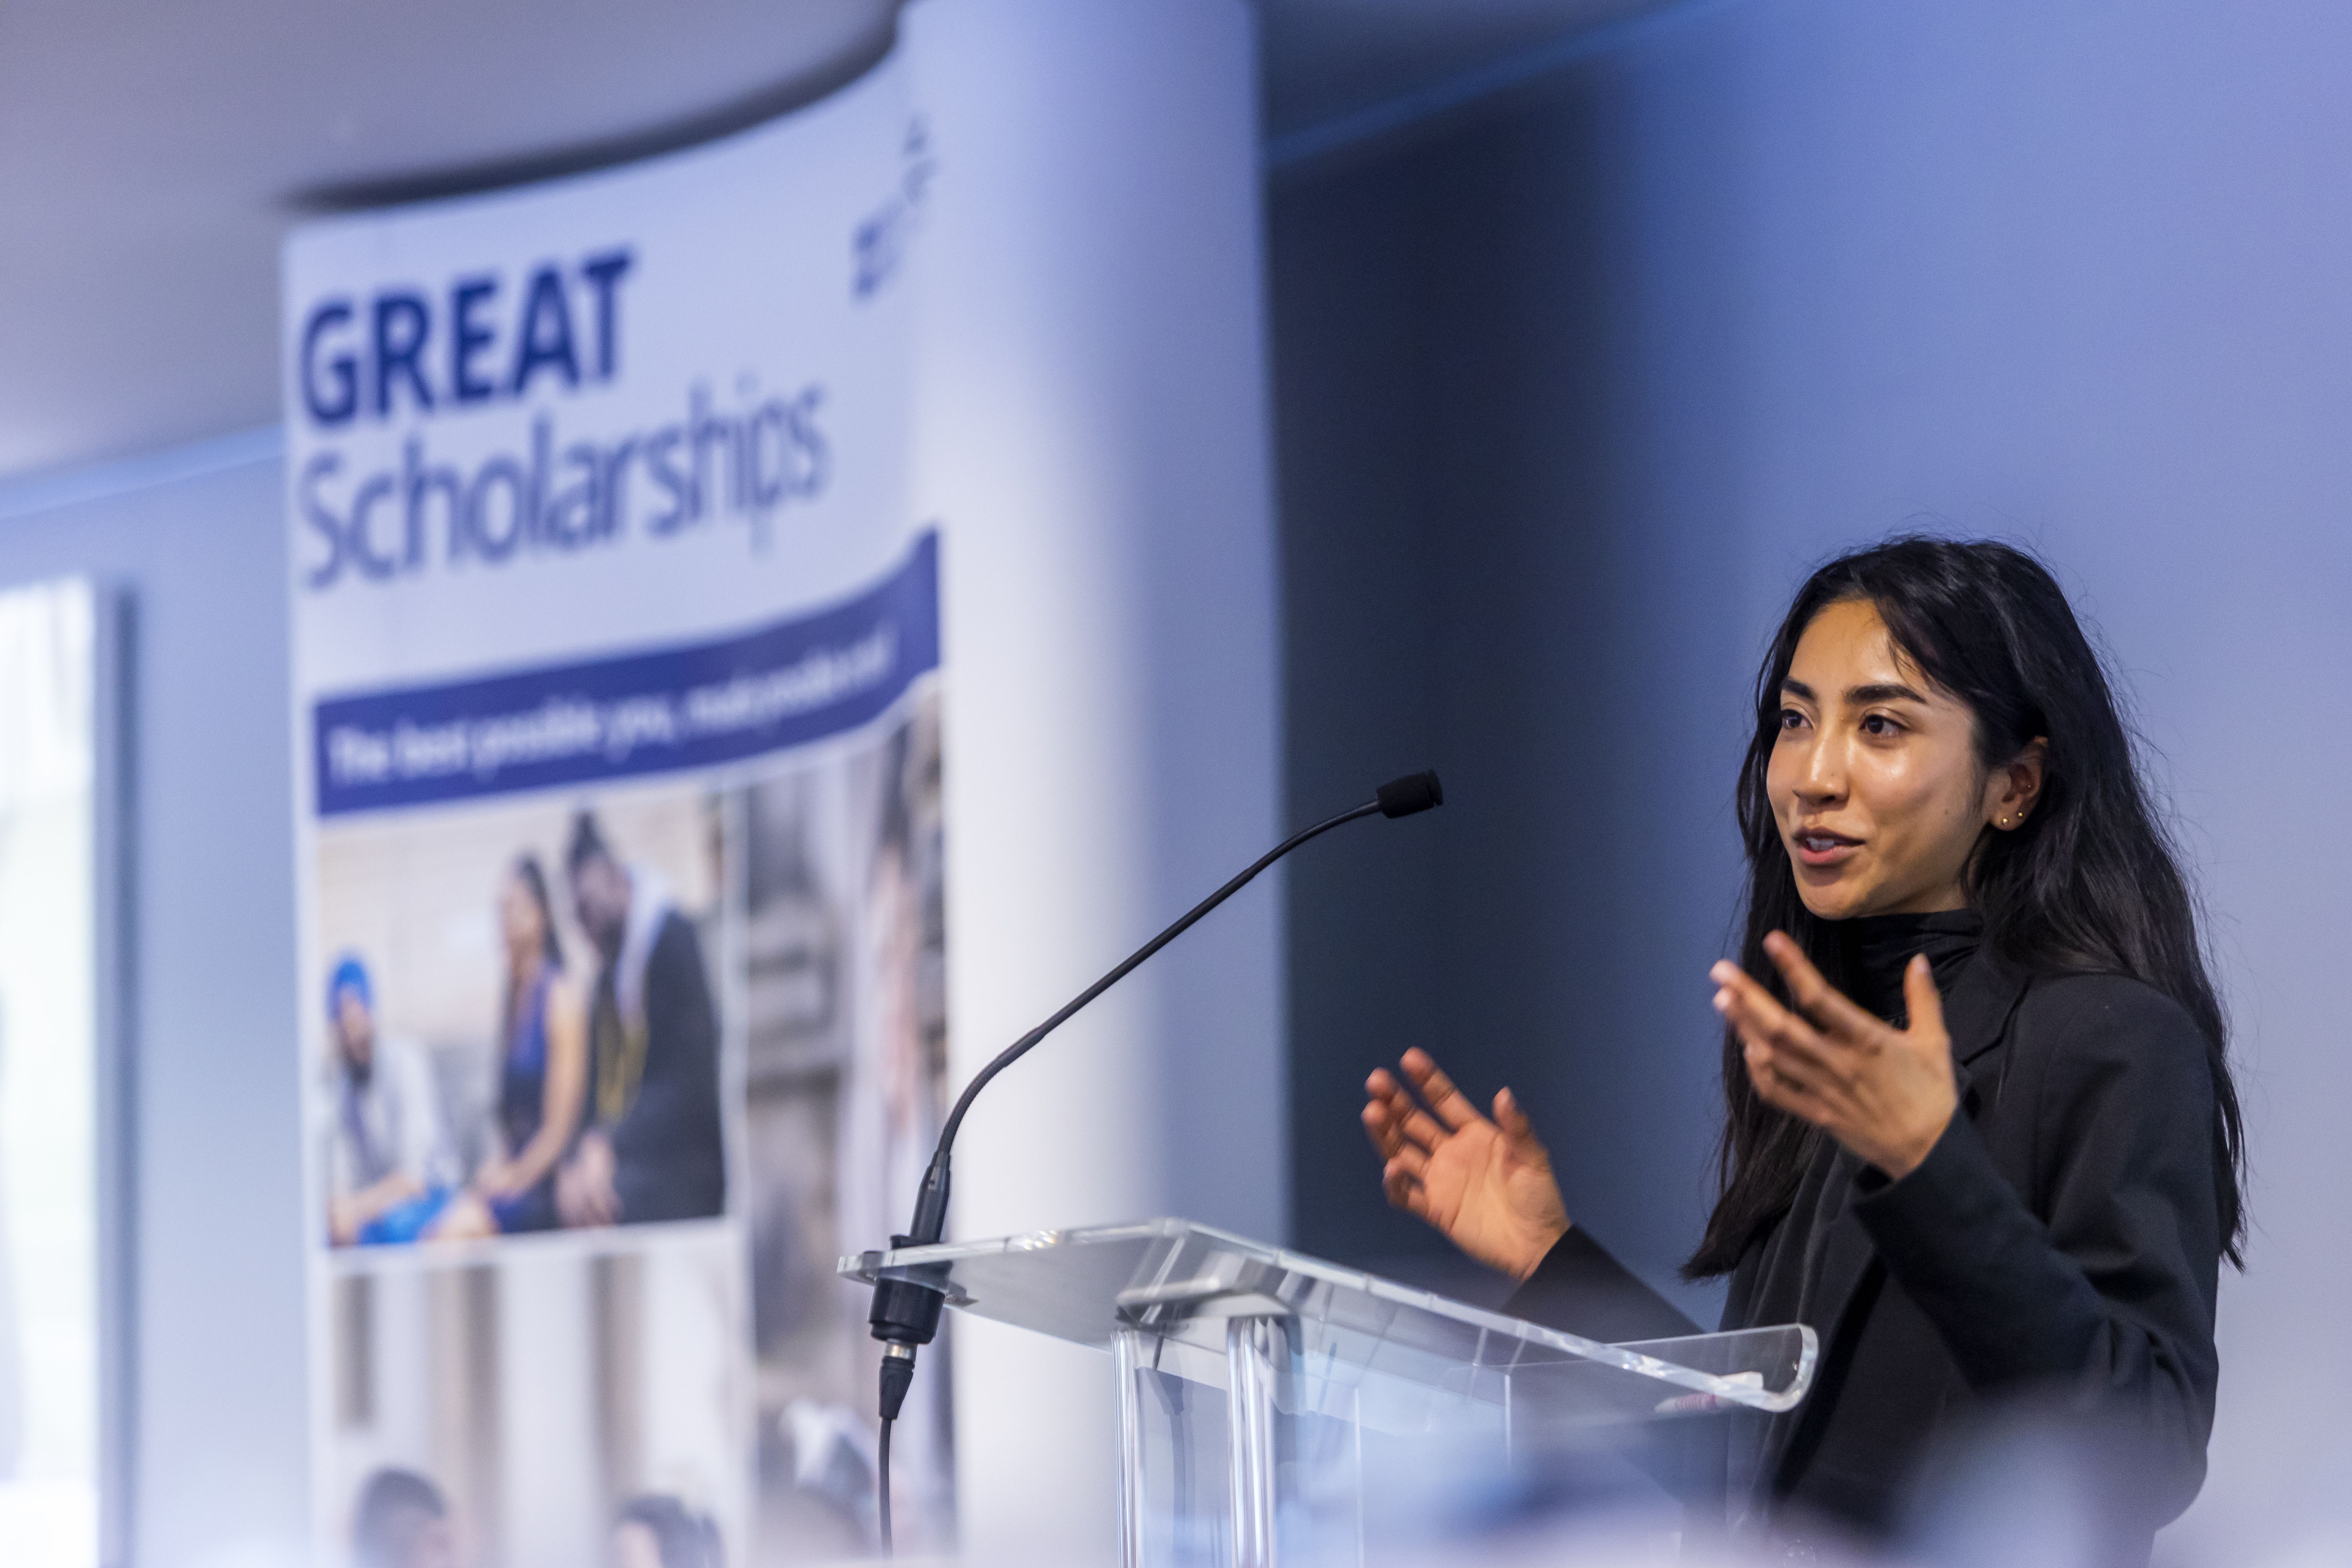 GREAT scholar Chrislyn Pereira from Malaysia stands behind a podium gesticulating passionately to the audience. She is beside a banner that says 'GREAT Scholarships'